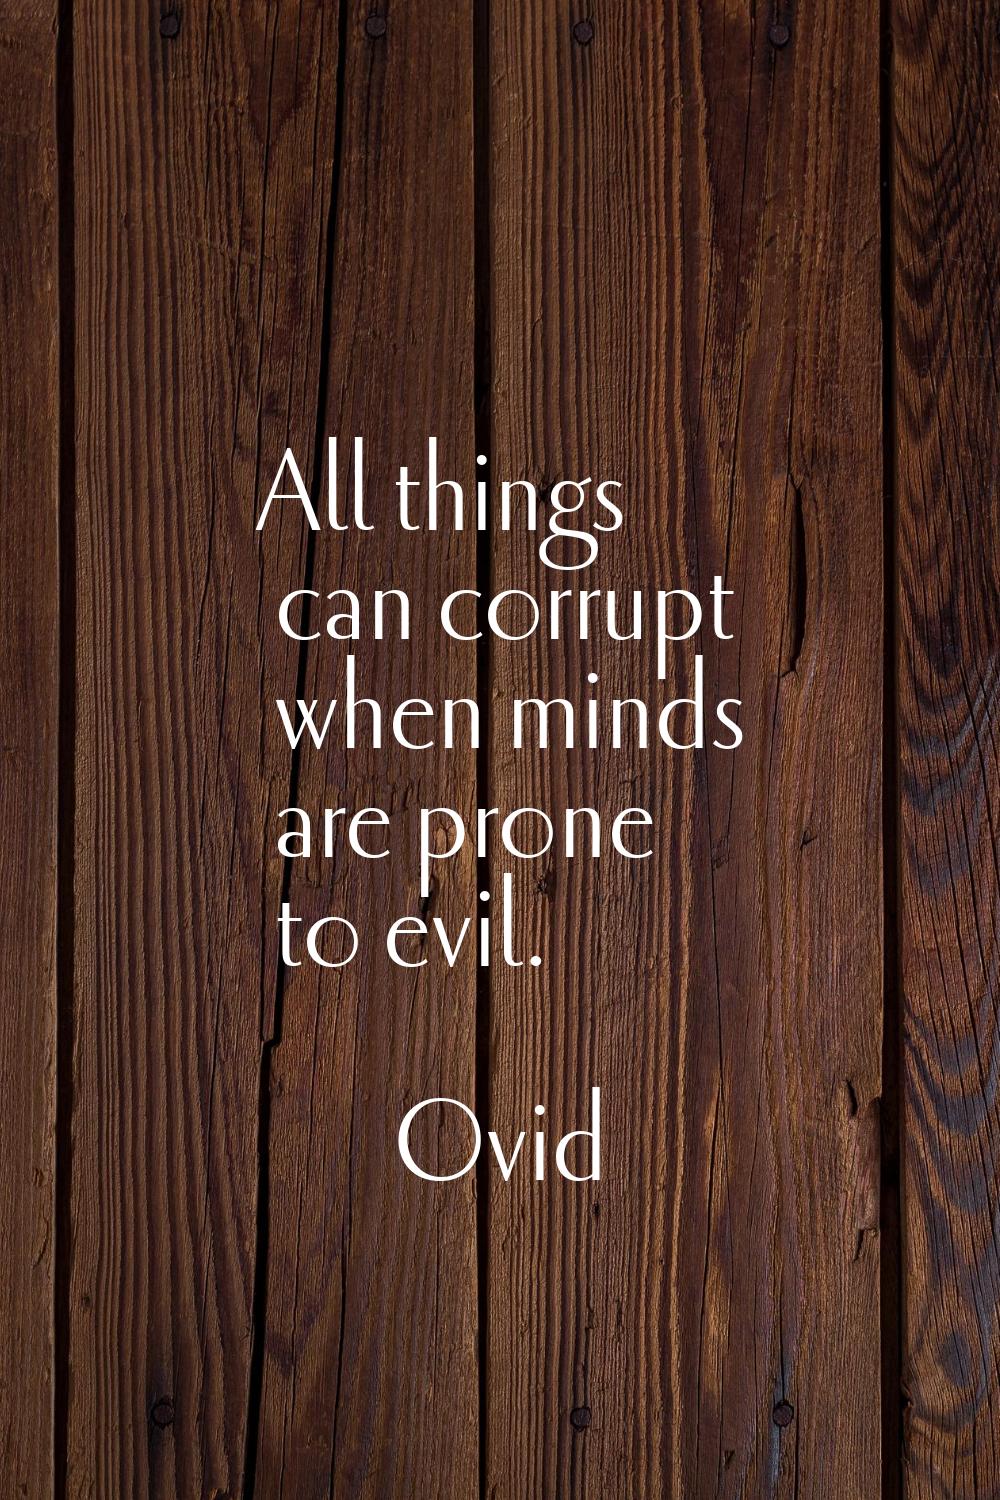 All things can corrupt when minds are prone to evil.